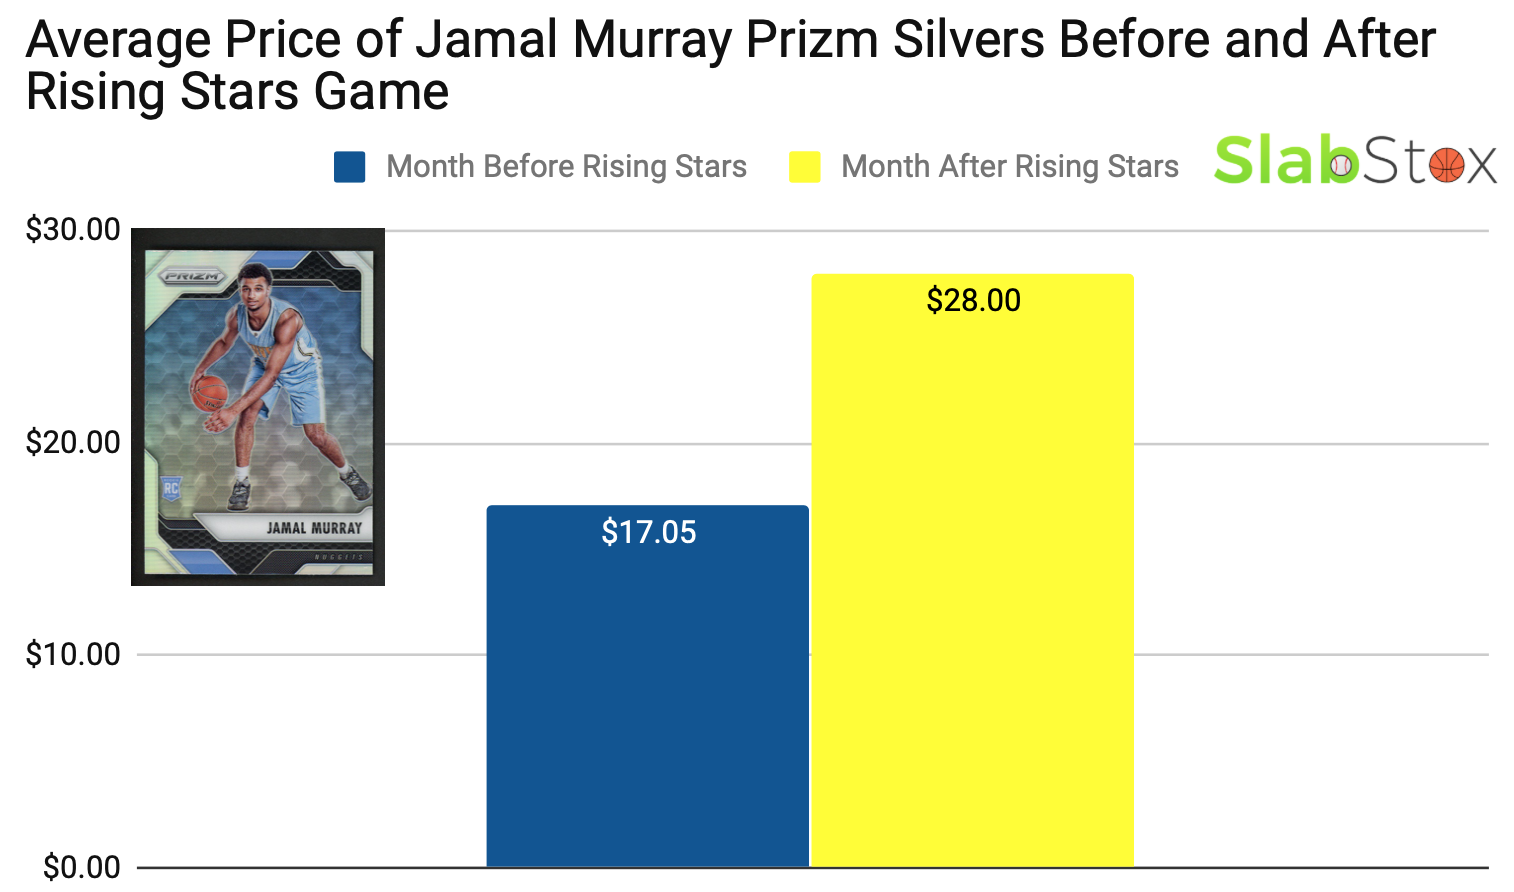 Bar graph of average price of Jamal Murray Prizm Silver sports card before and after Rising Stars game